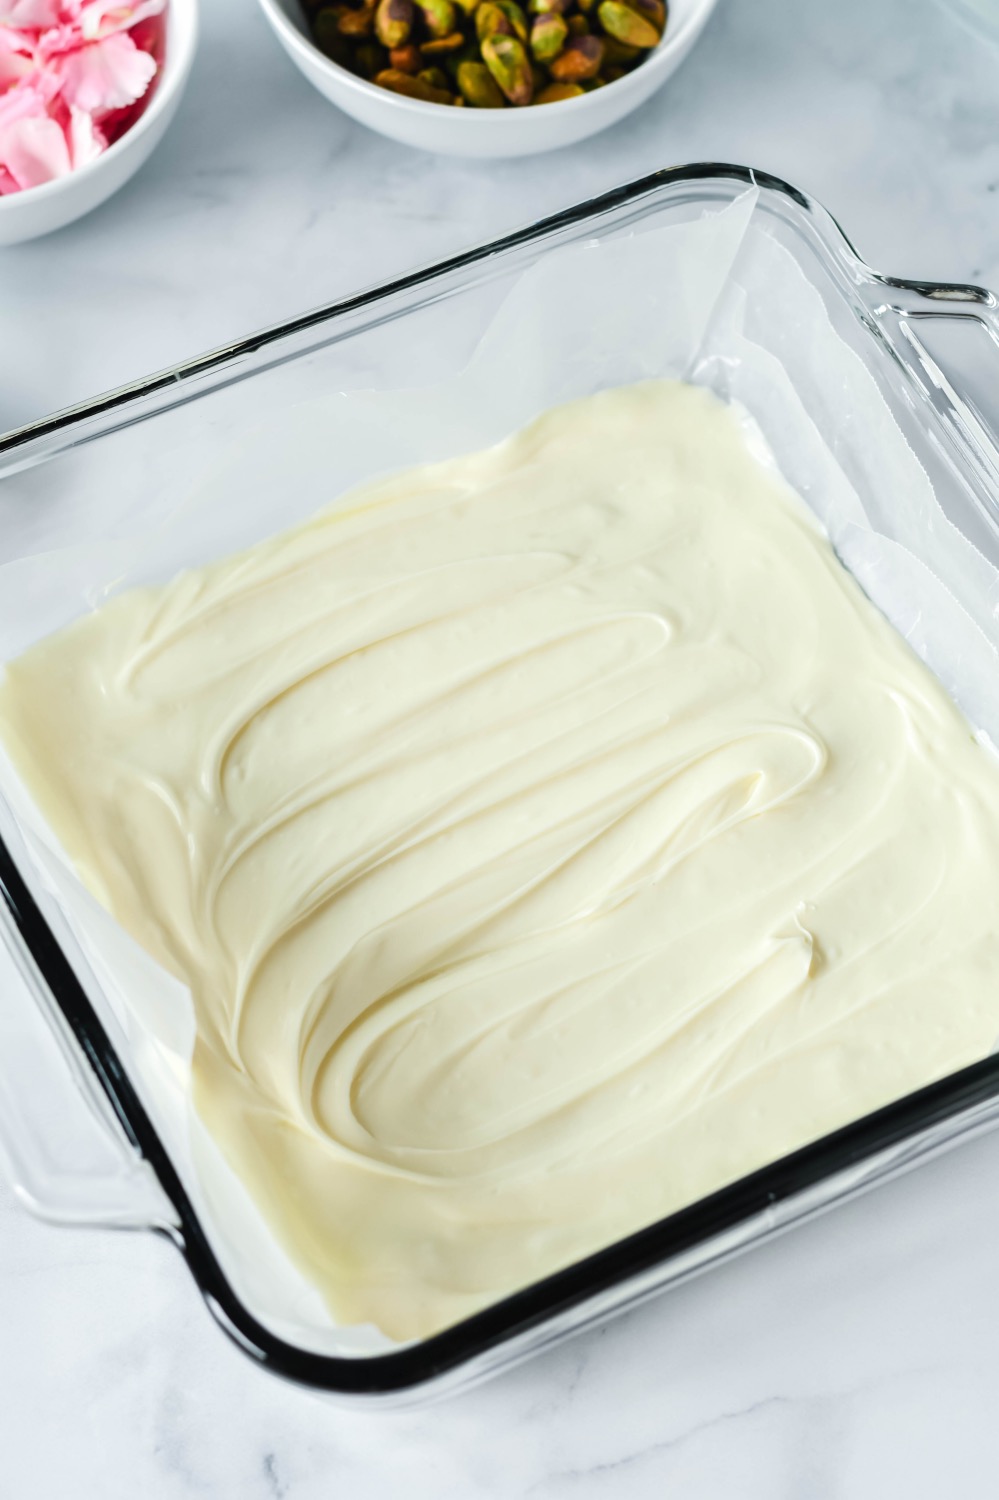 let the white chocolate cool at room temperature